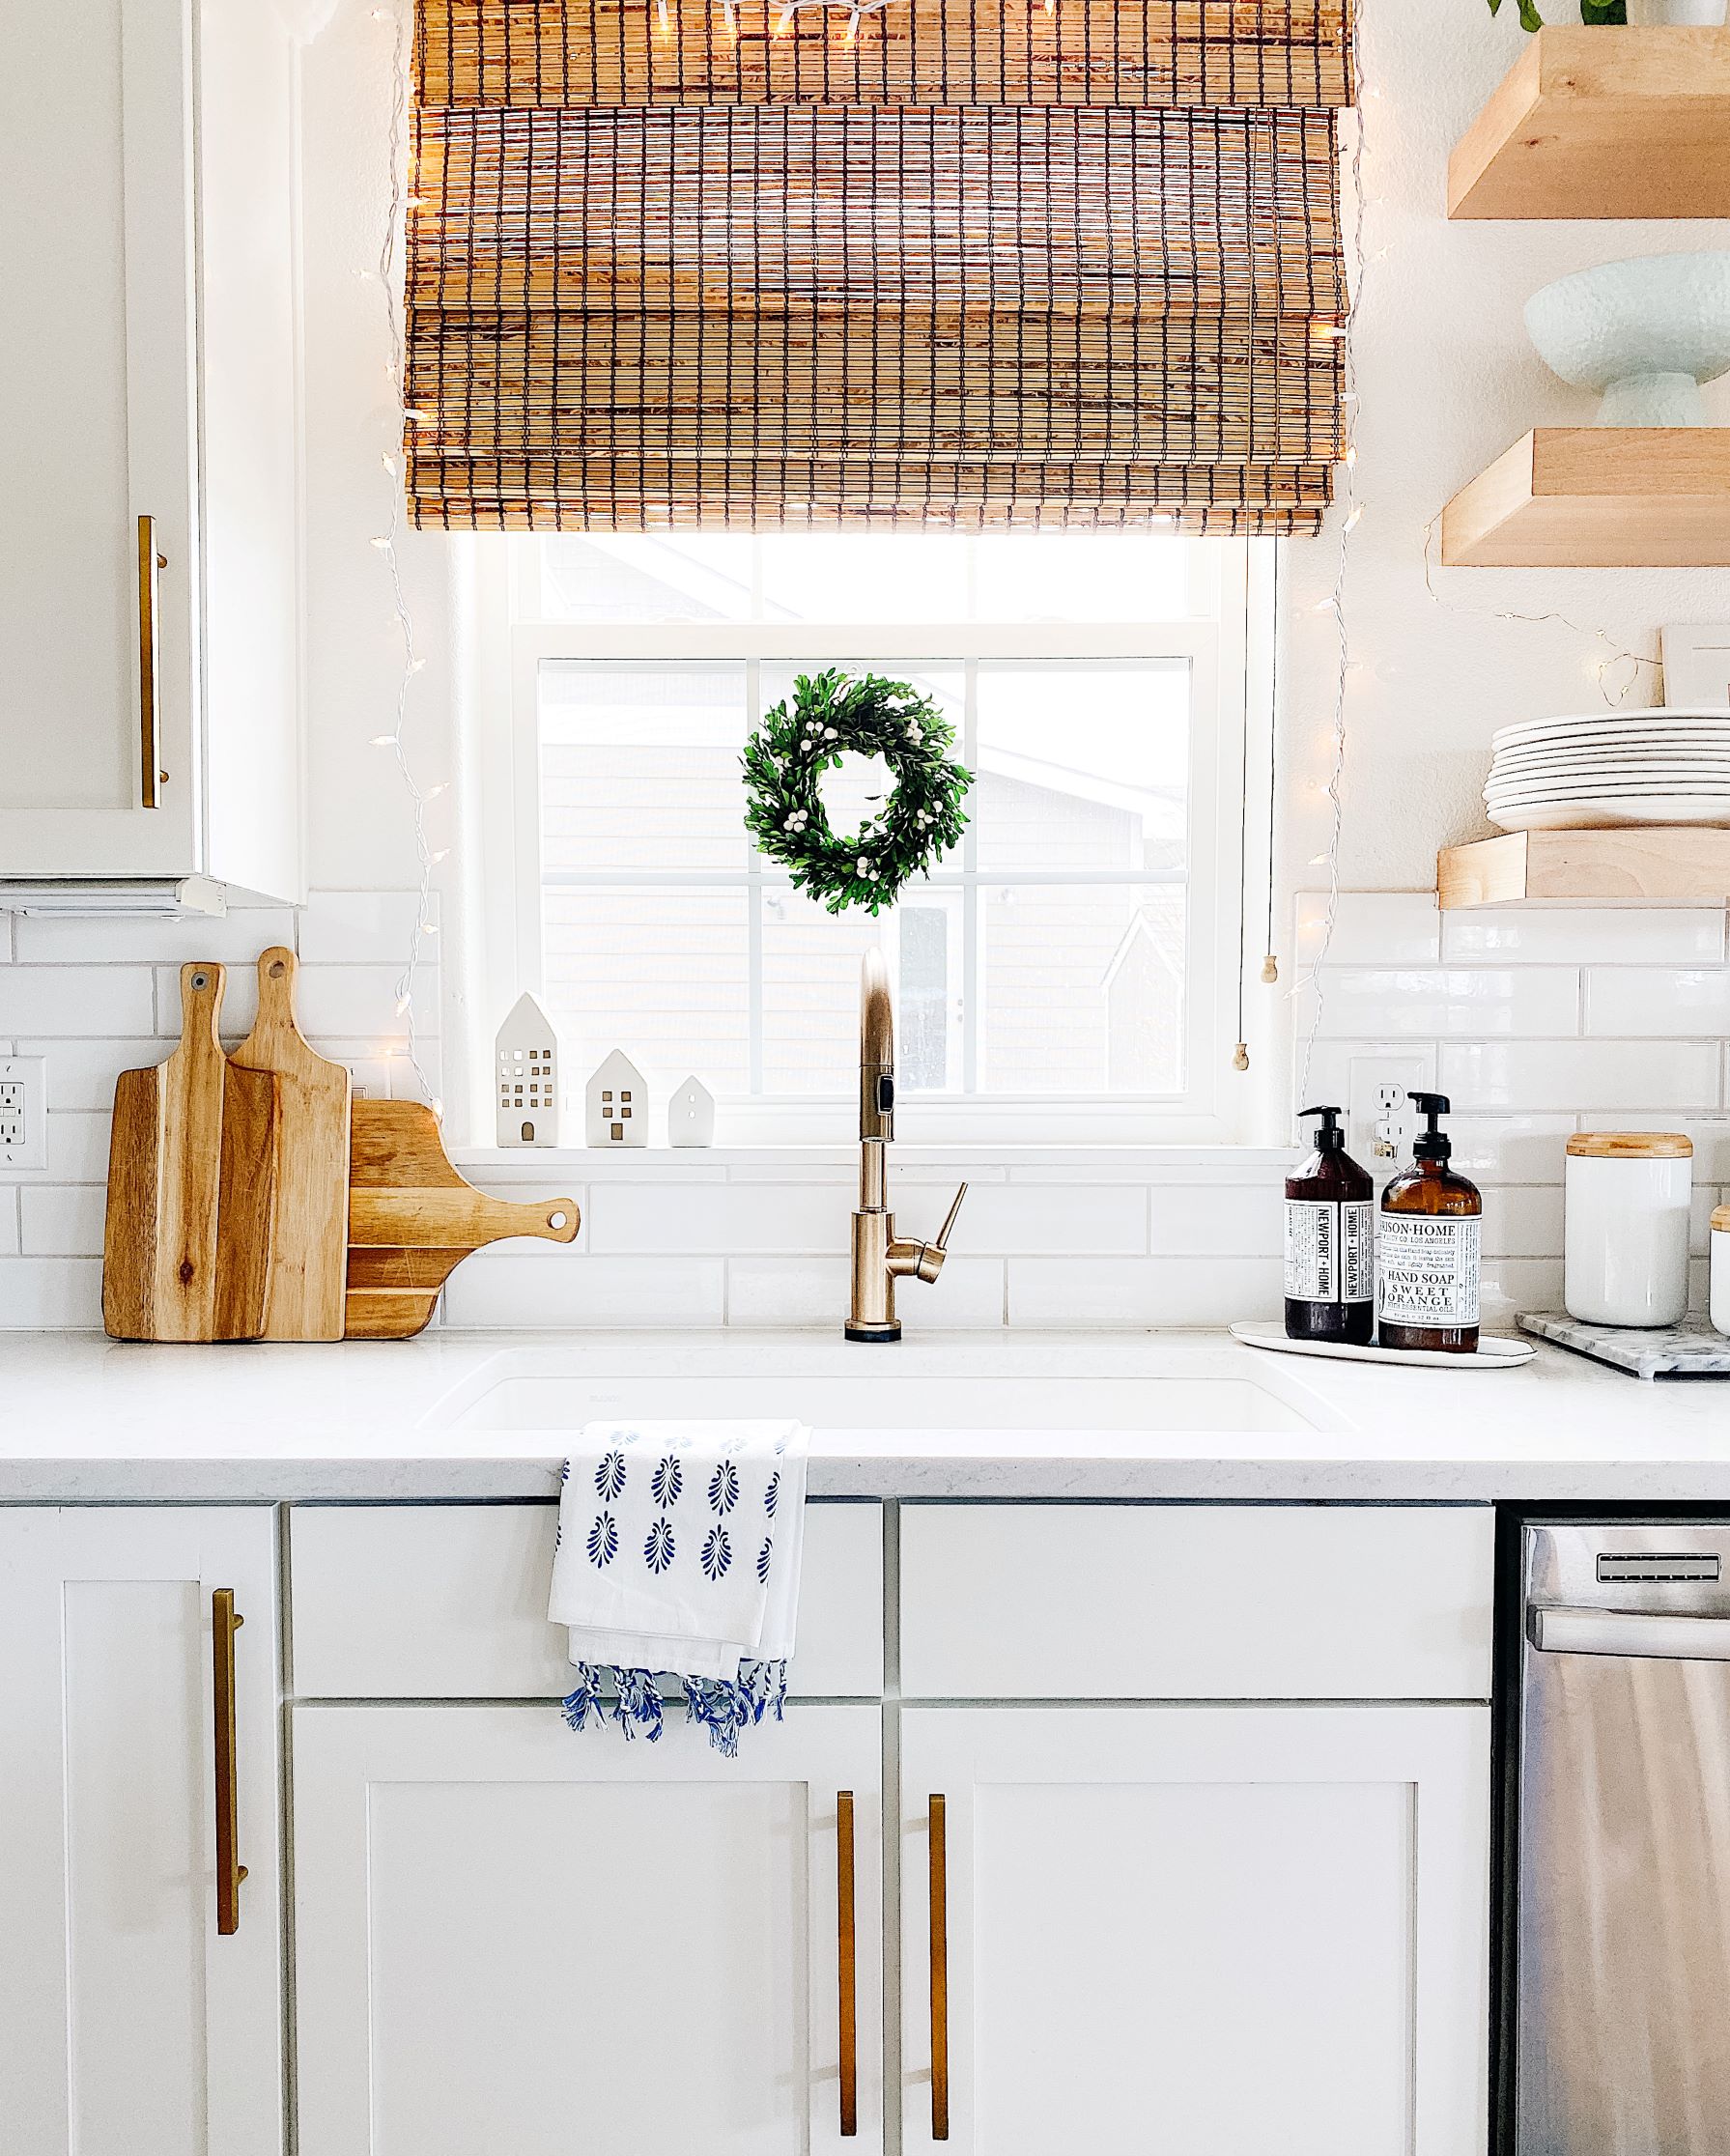 Love adding twinkle lights and Christmas wreaths to the kitchen during the holidays! #christmasdecor #homedecor #home #styling - jane at home